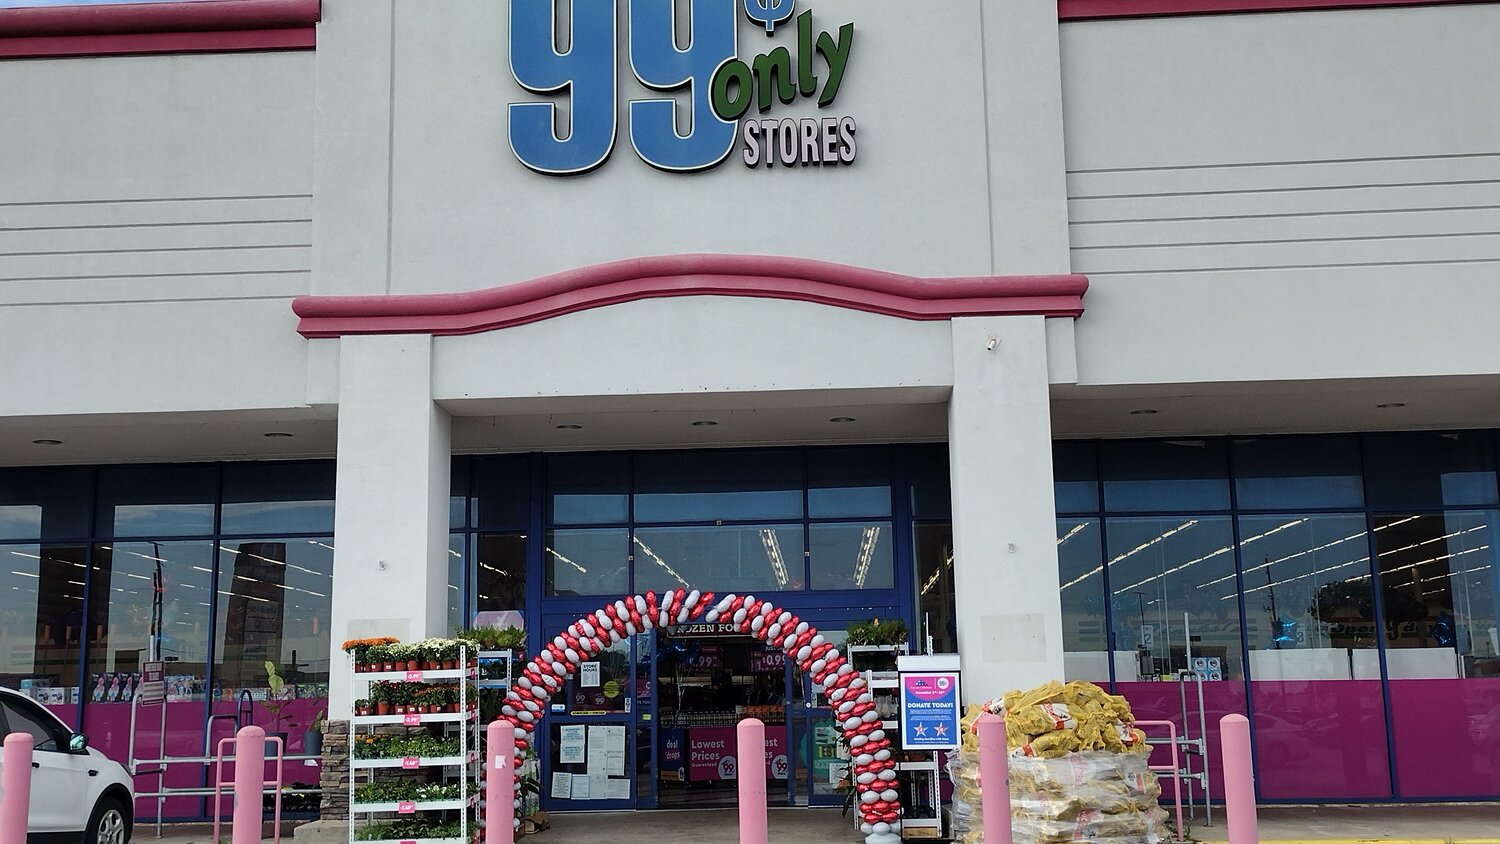 99 Cent Stores kicks off fundraising event benefitting veterans group Folds of Honor